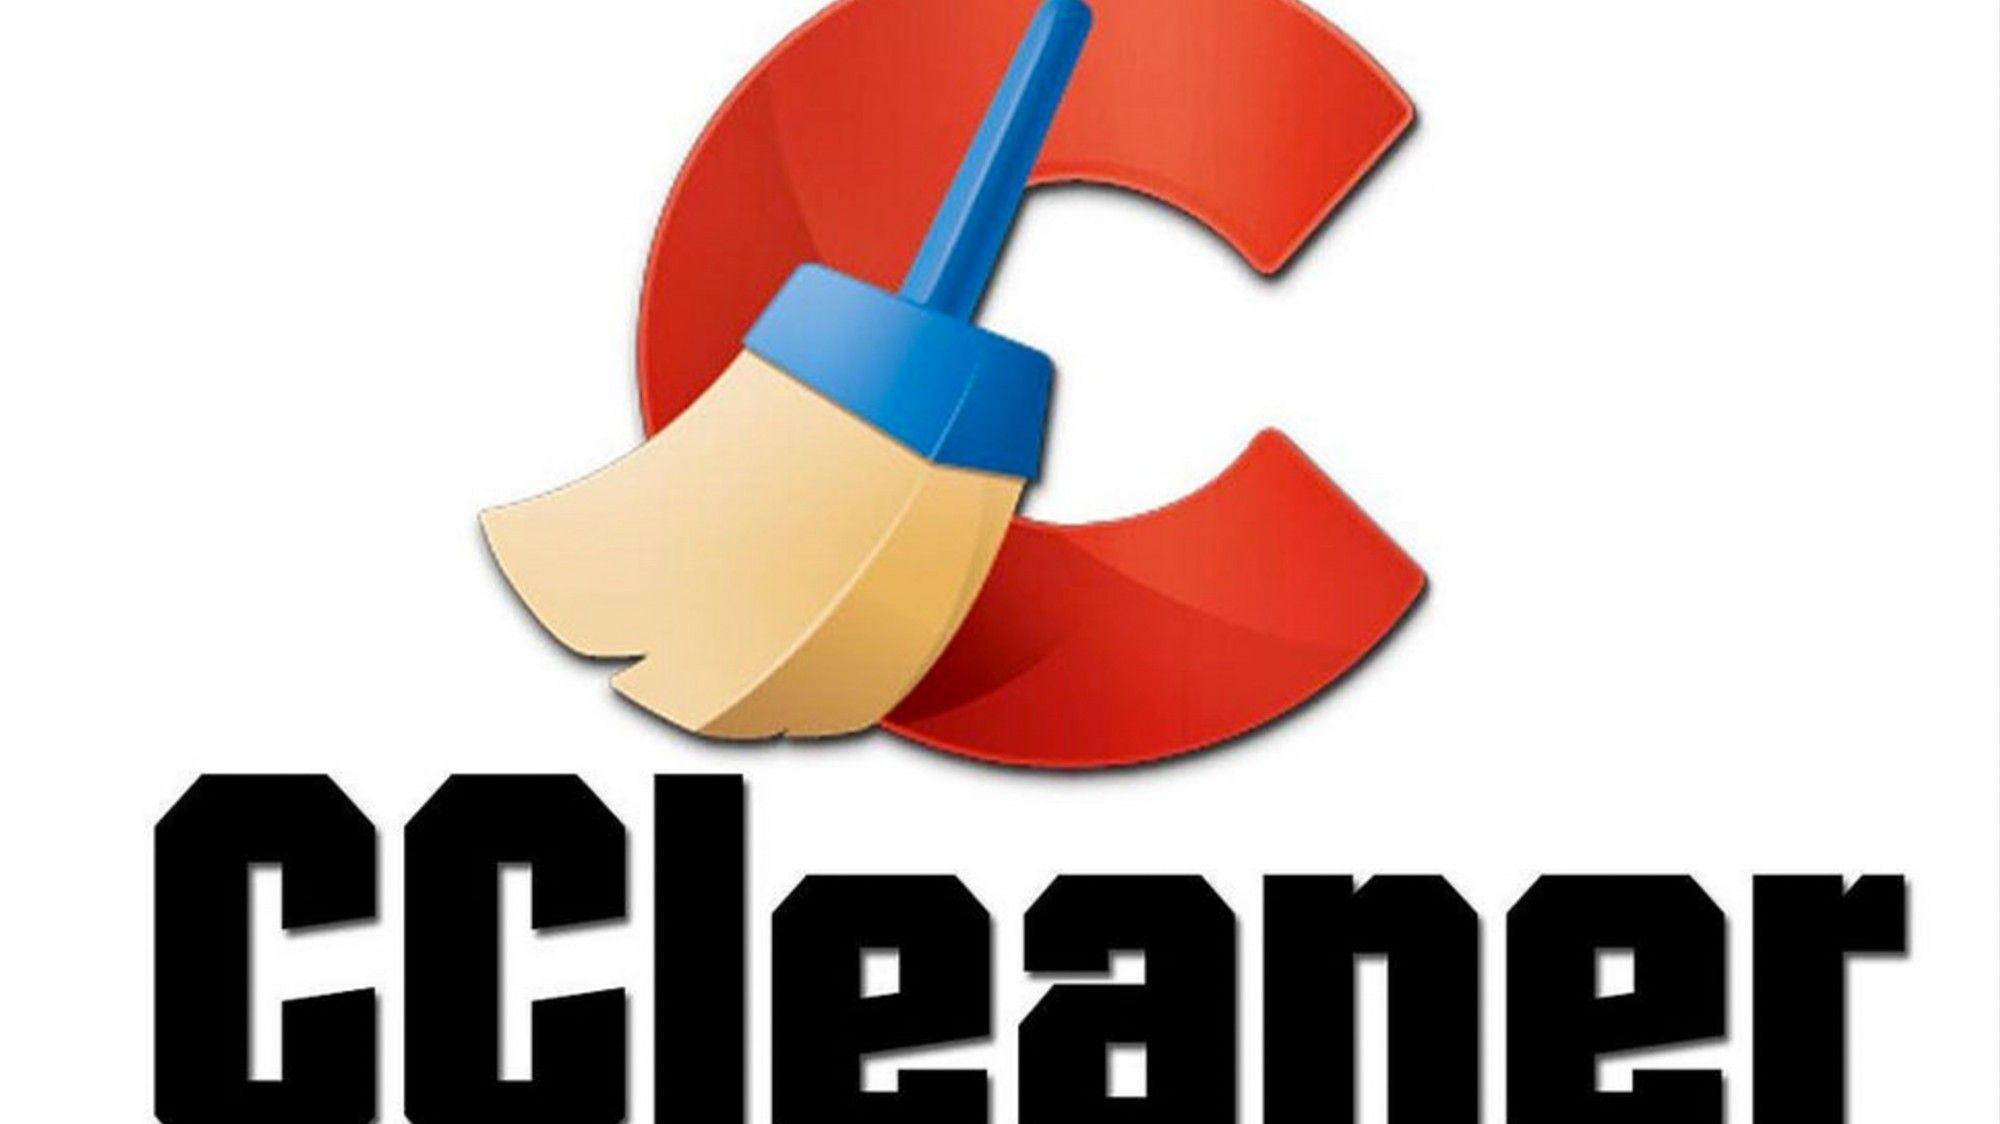 CCleaner Logo - Malware Infected CCleaner Installer Distributed To Users Via